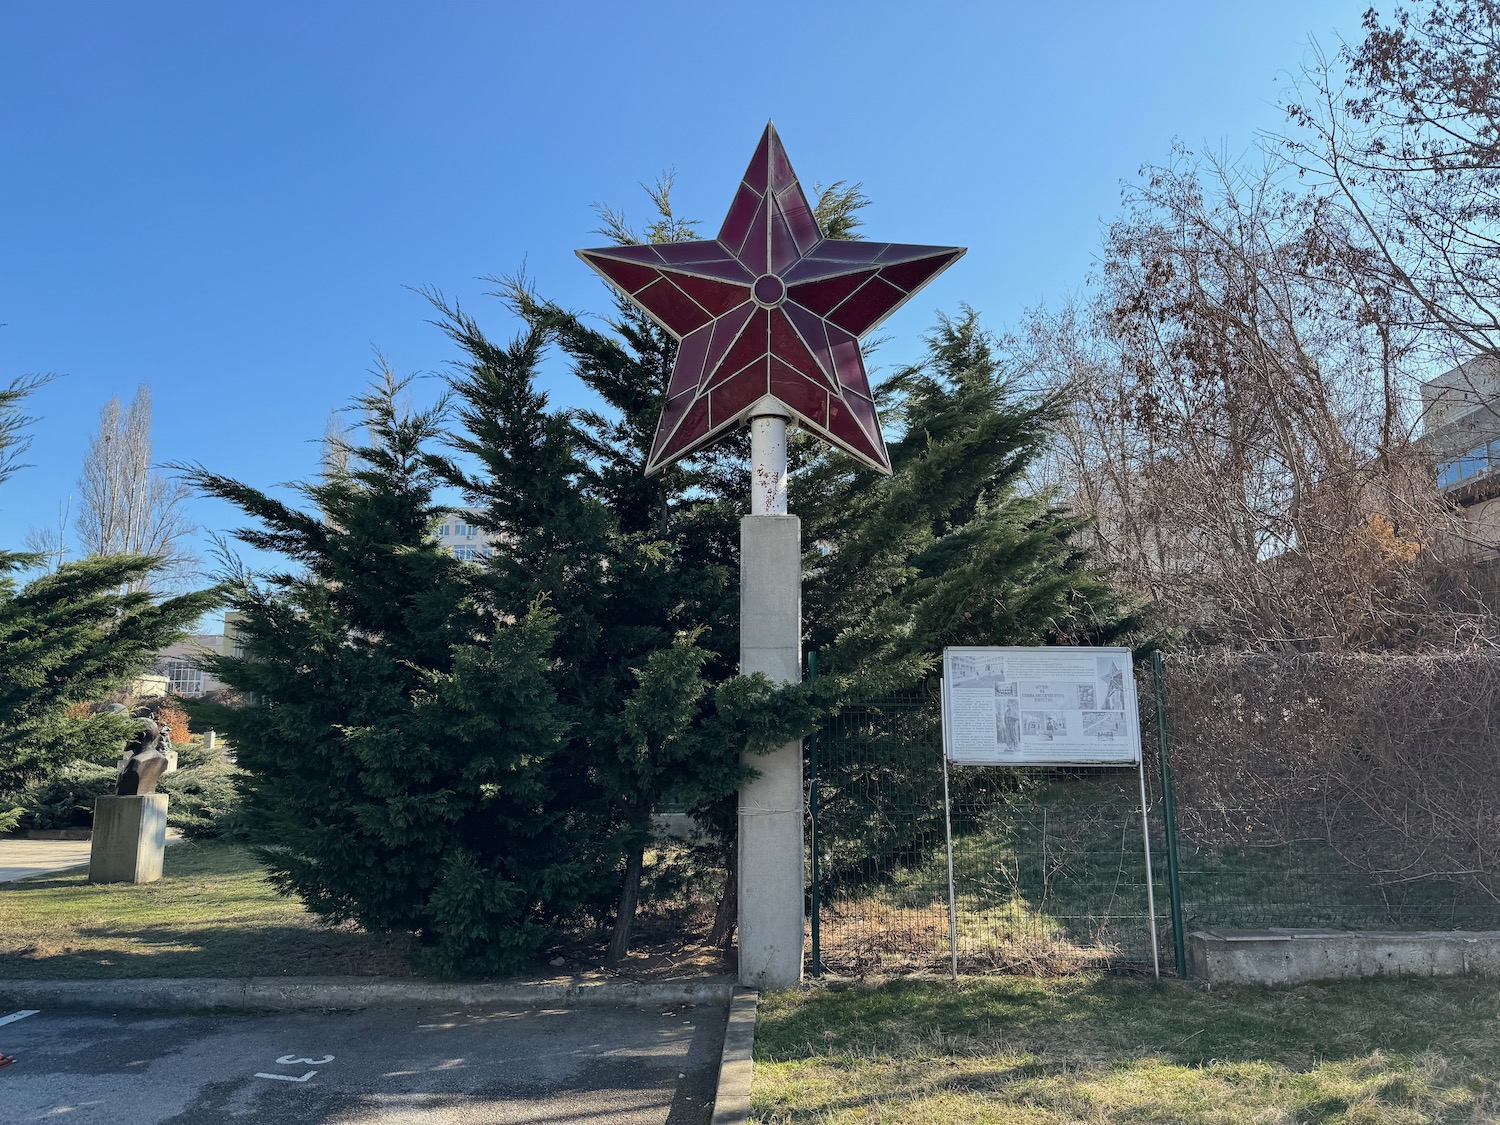 a large red star on a pole